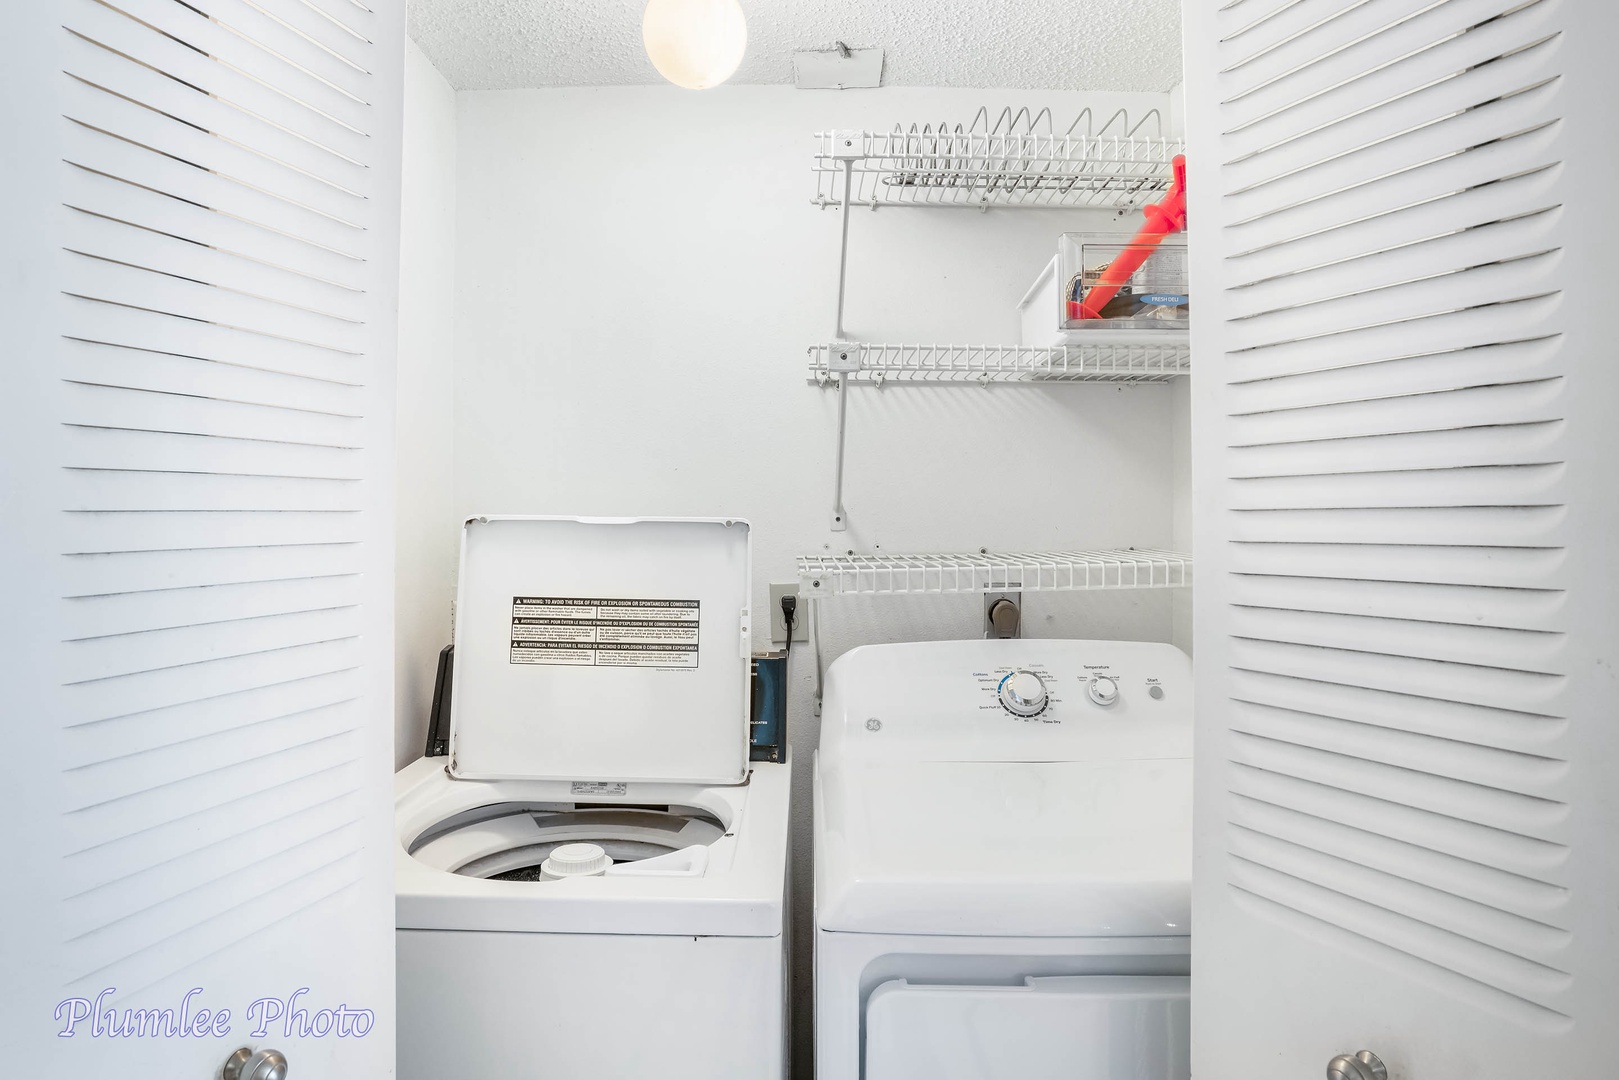 No need to overpack , use the in-closet washer and dryer